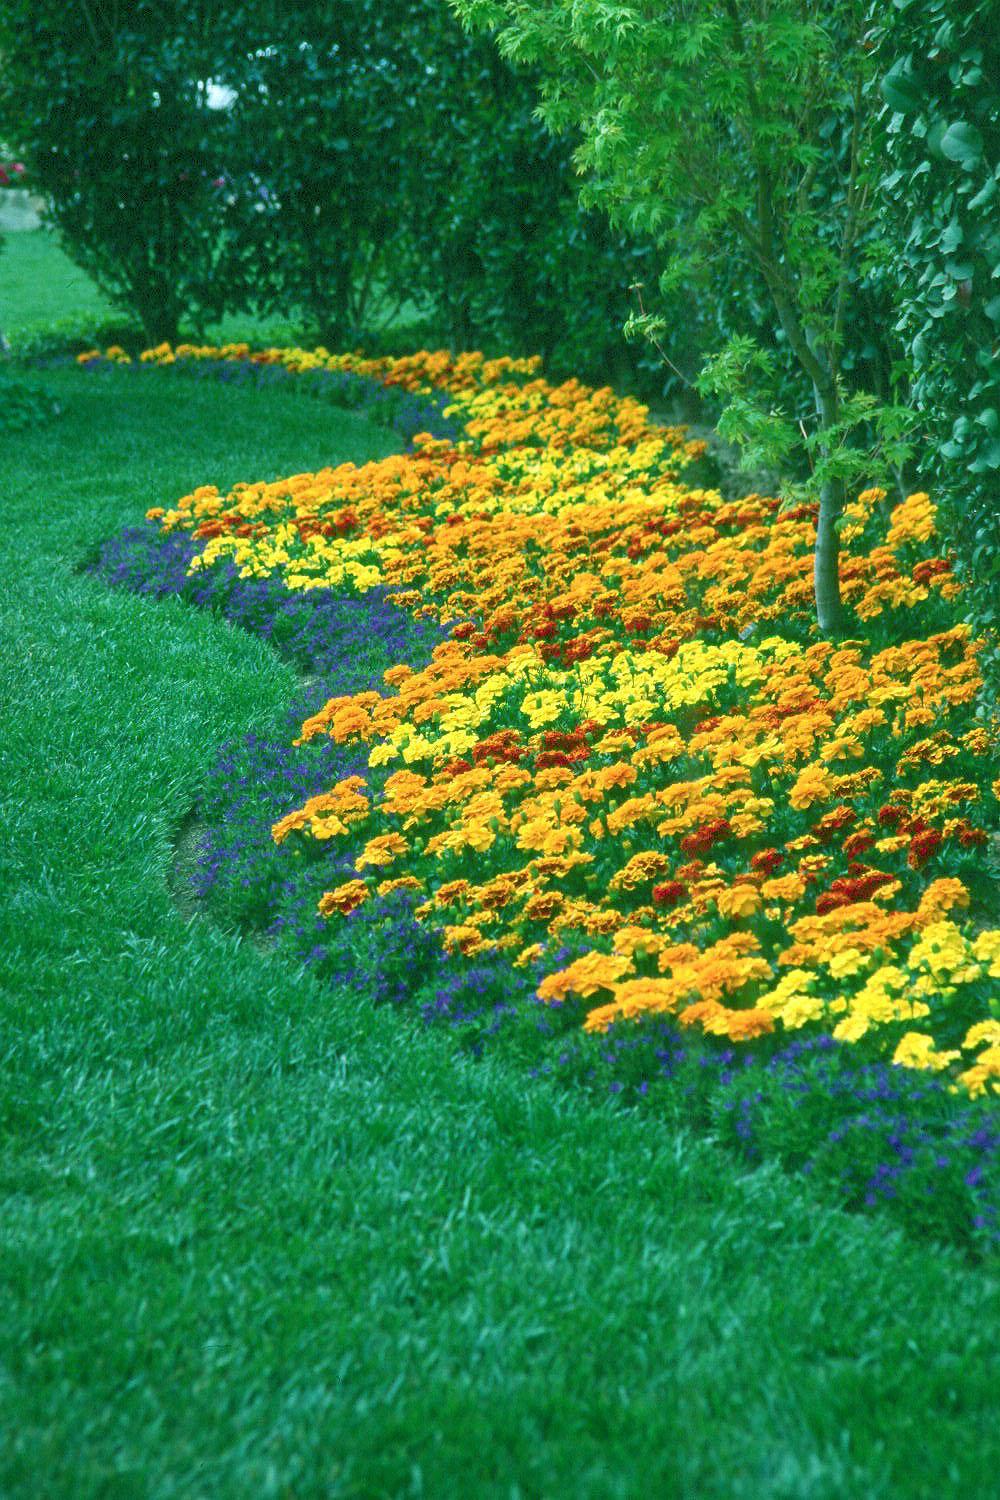 The small-flowered French Marigolds and blue-flowered lobelia create a dazzling landscape display when planted together.